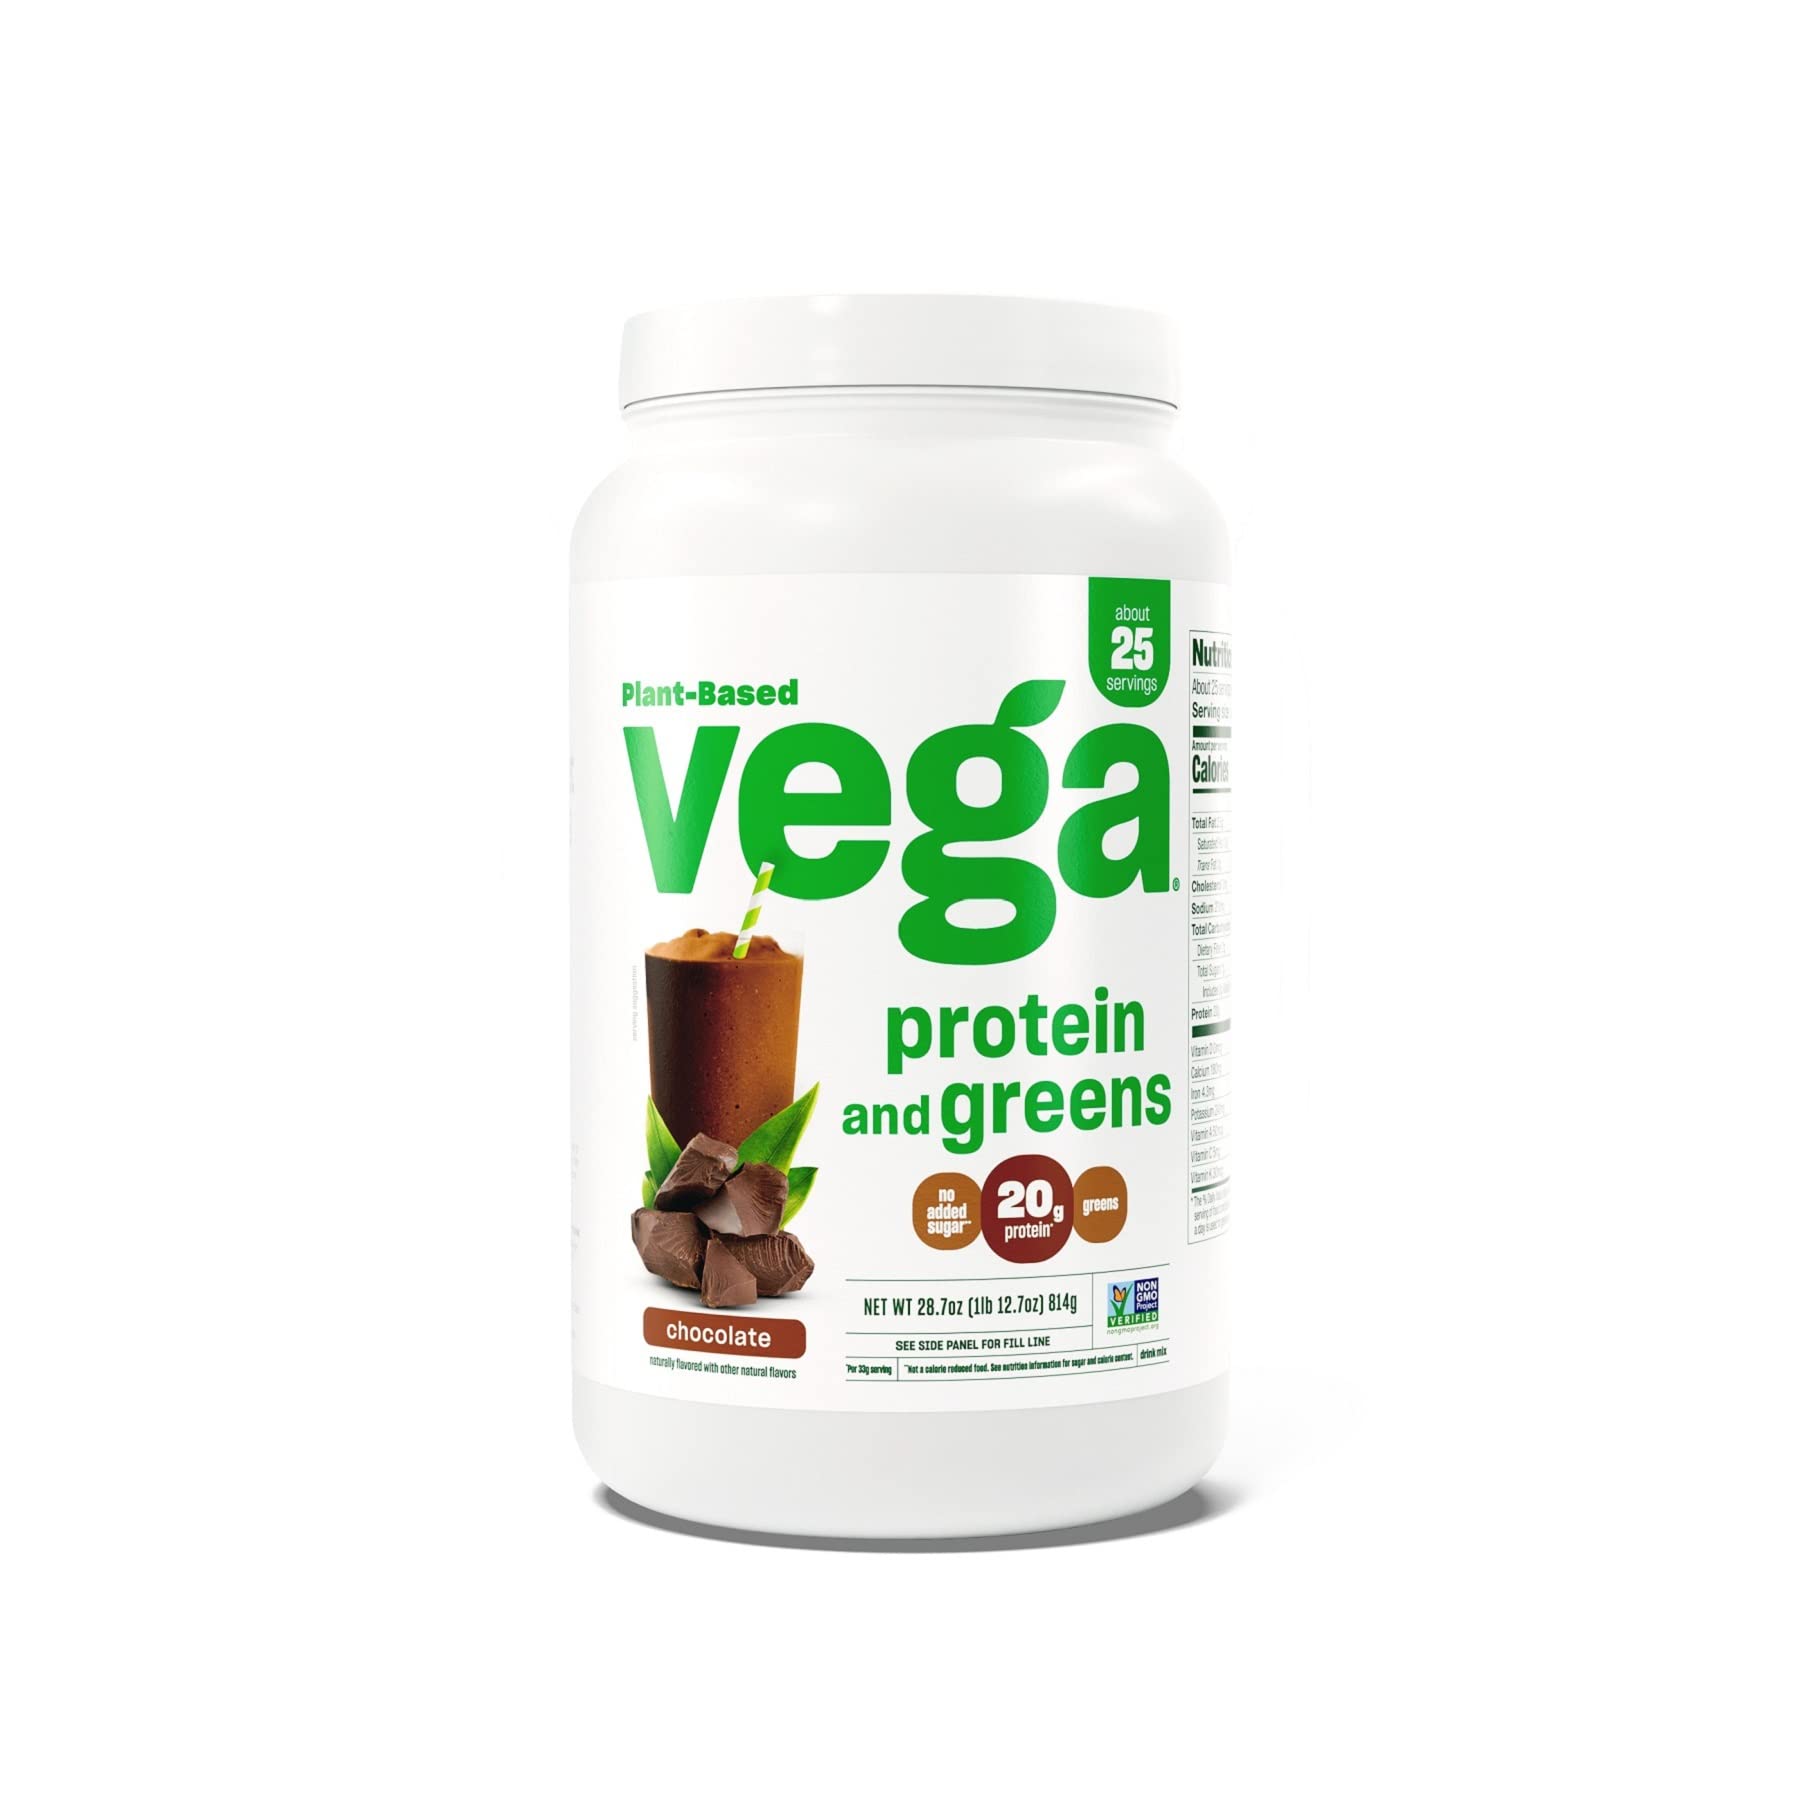 Vega Protein and Greens Protein Powder, Chocolate - 20g Plant Based Protein Plus Veggies, Vegan, Non GMO, Pea Protein for Women and Men, 1.8 lbs (Packaging May Vary)